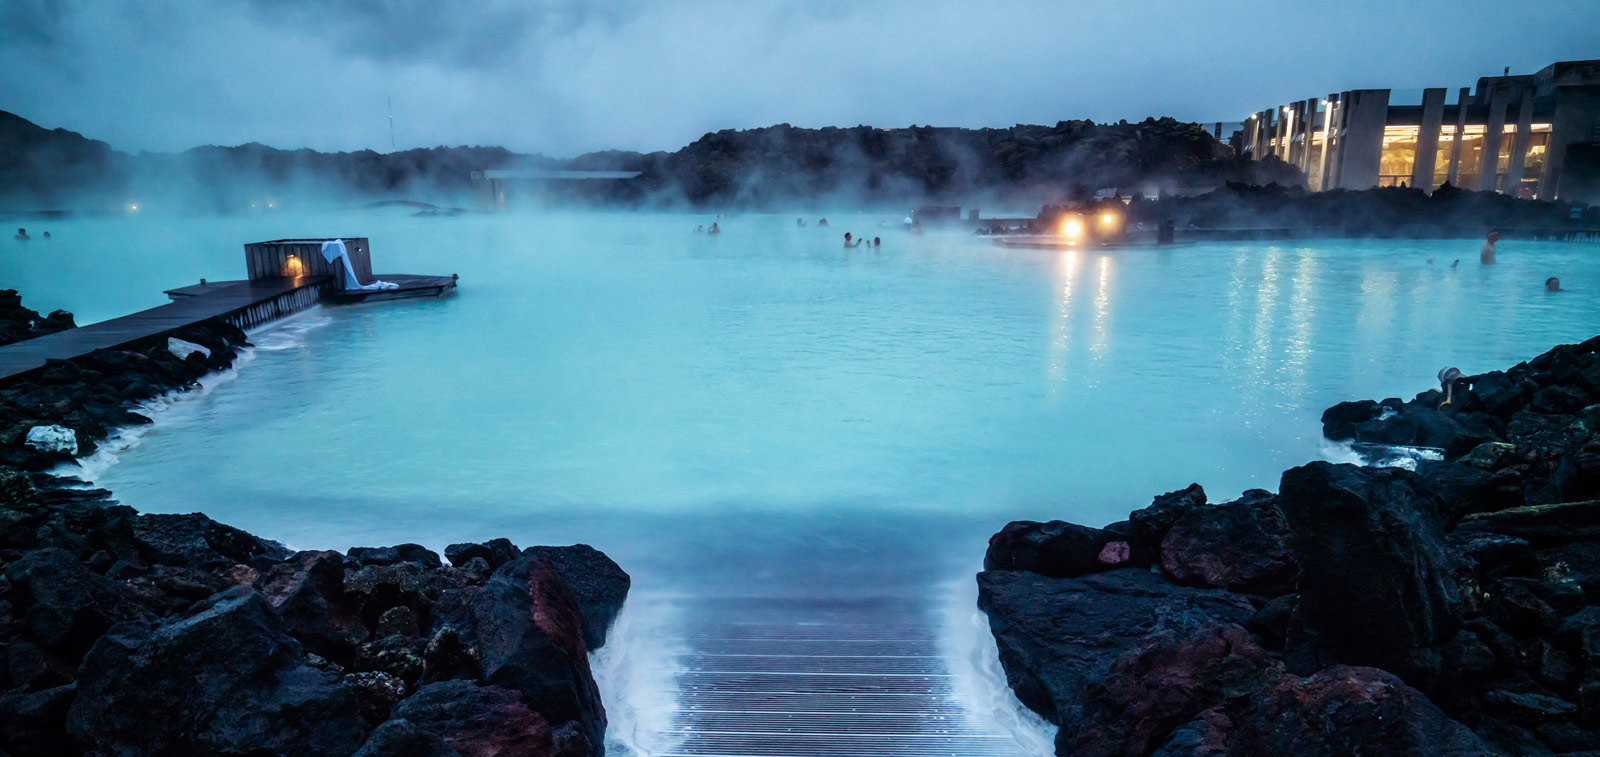 Blue Lagoon Hot Springs in Iceland